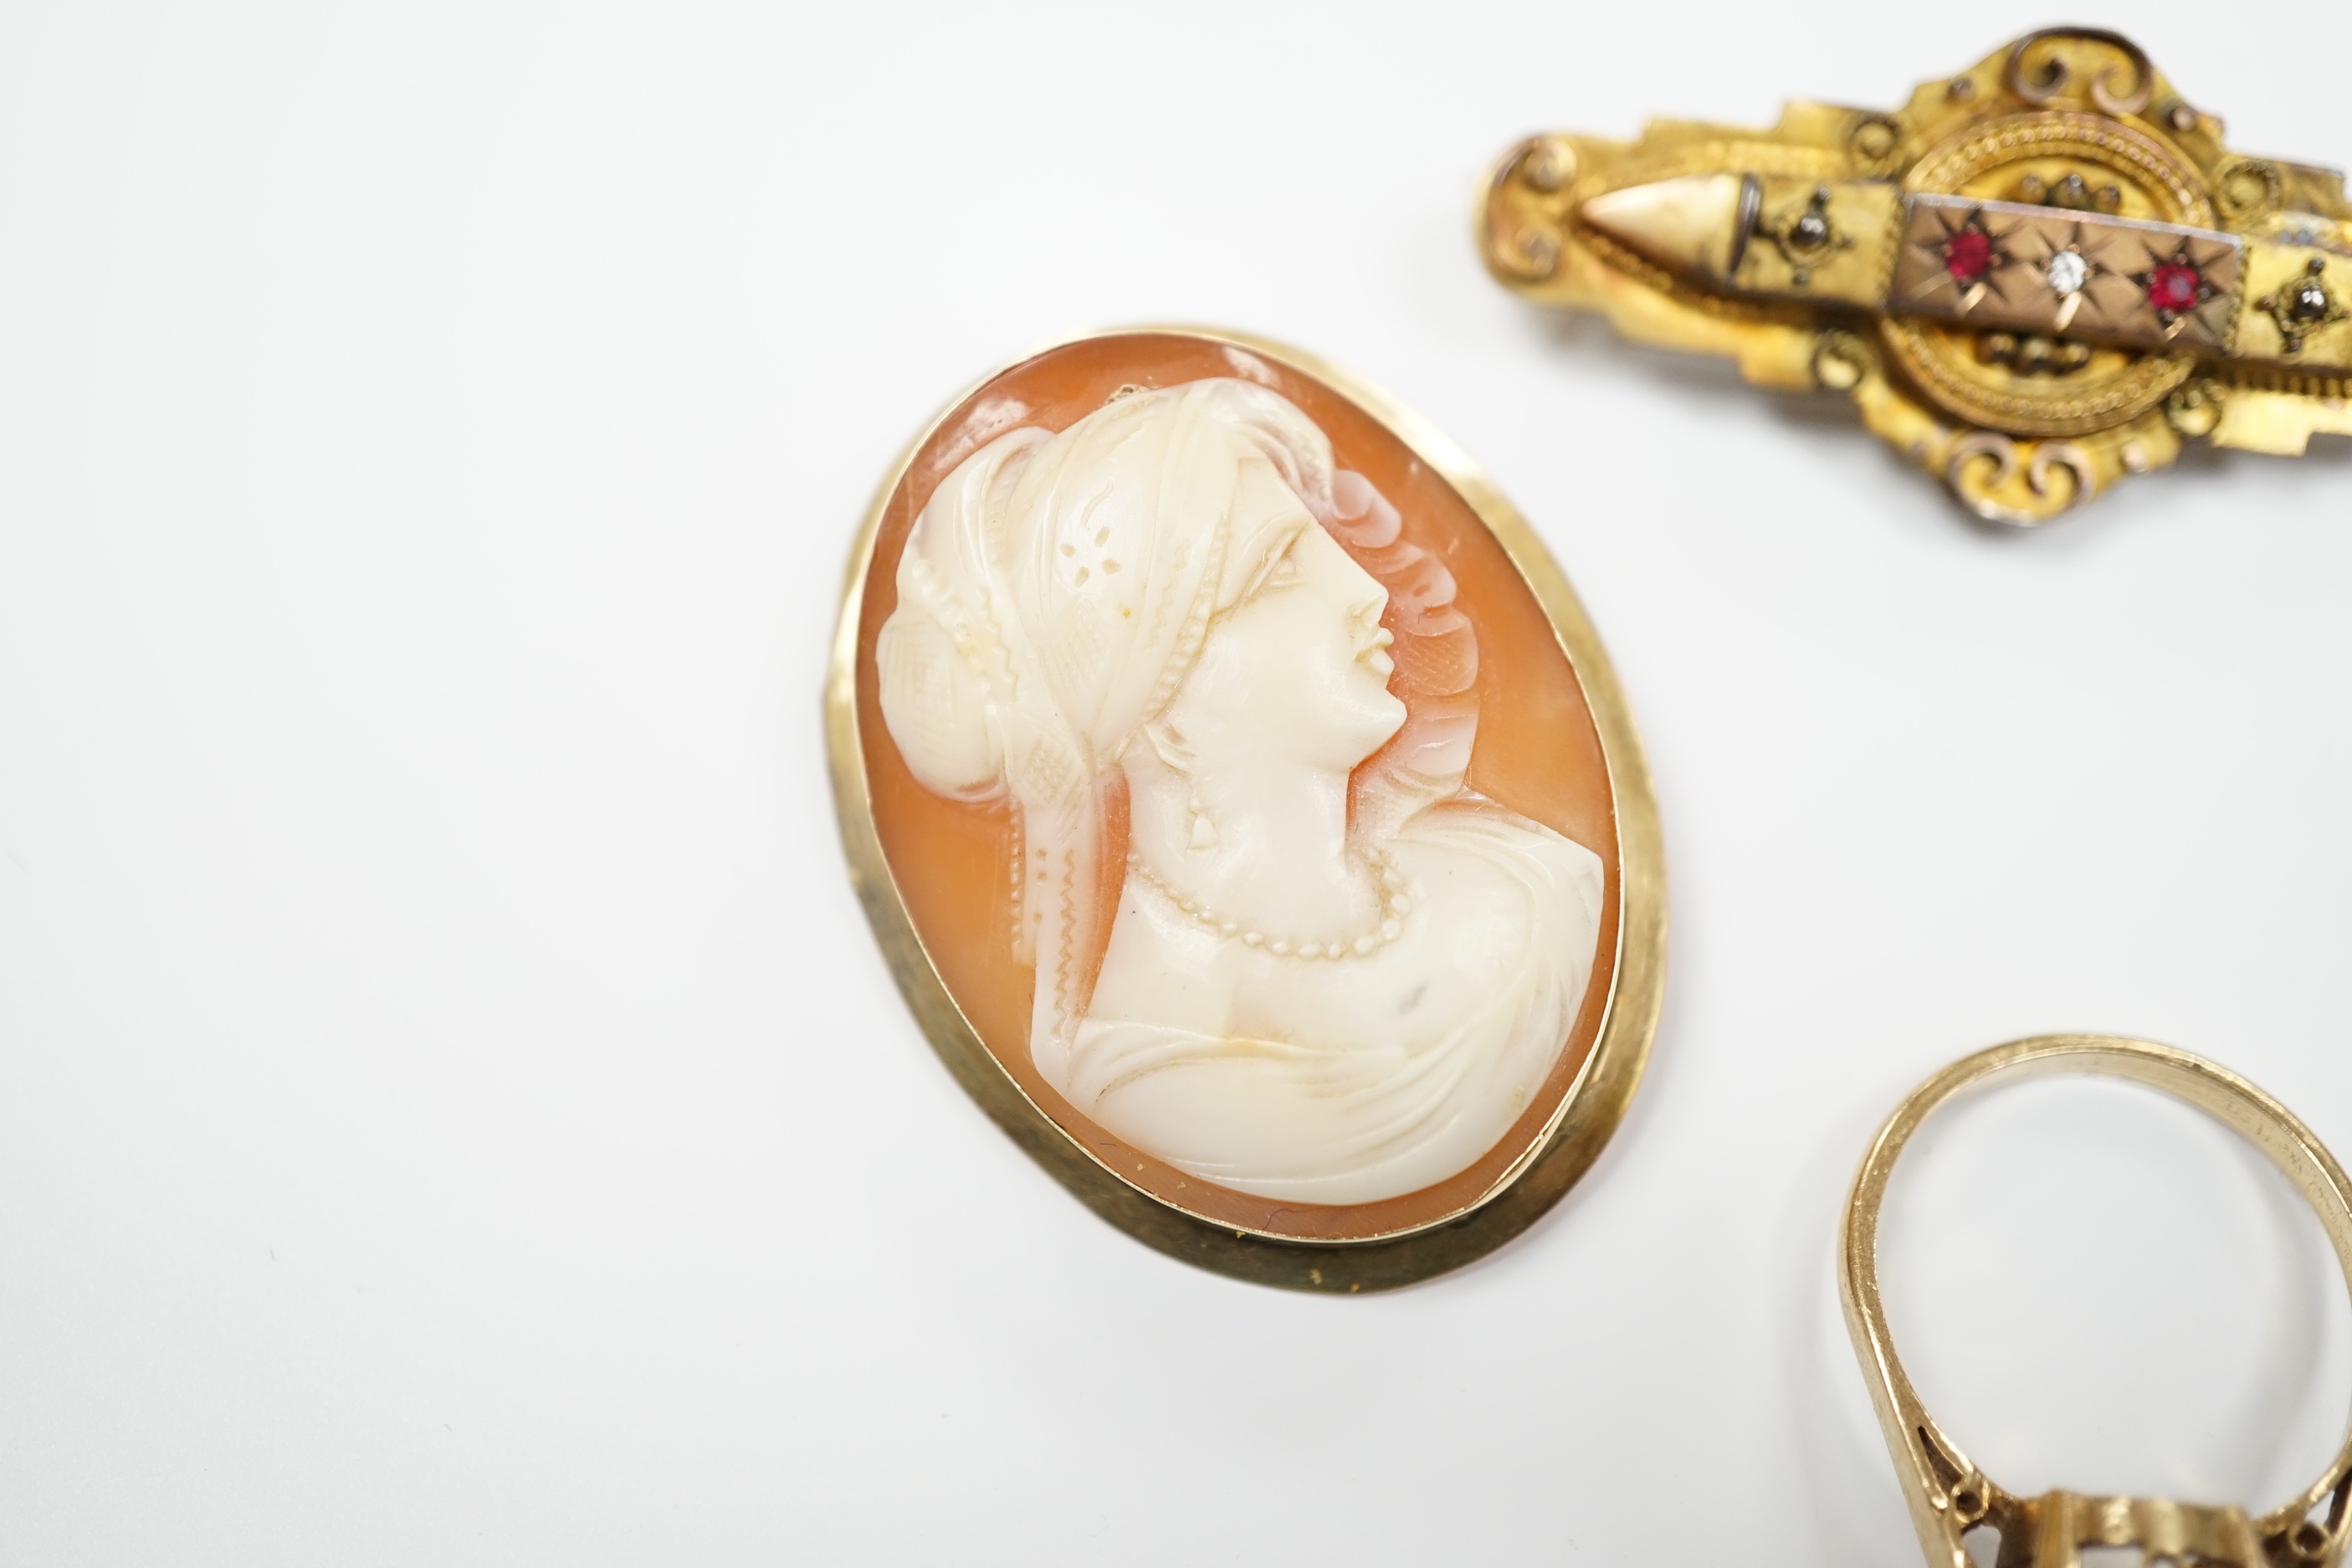 Two 9ct mounted oval cameo shell brooches, largest 38mm, a 9ct and gem set ring and a 9ct gold and gem set bar brooch.